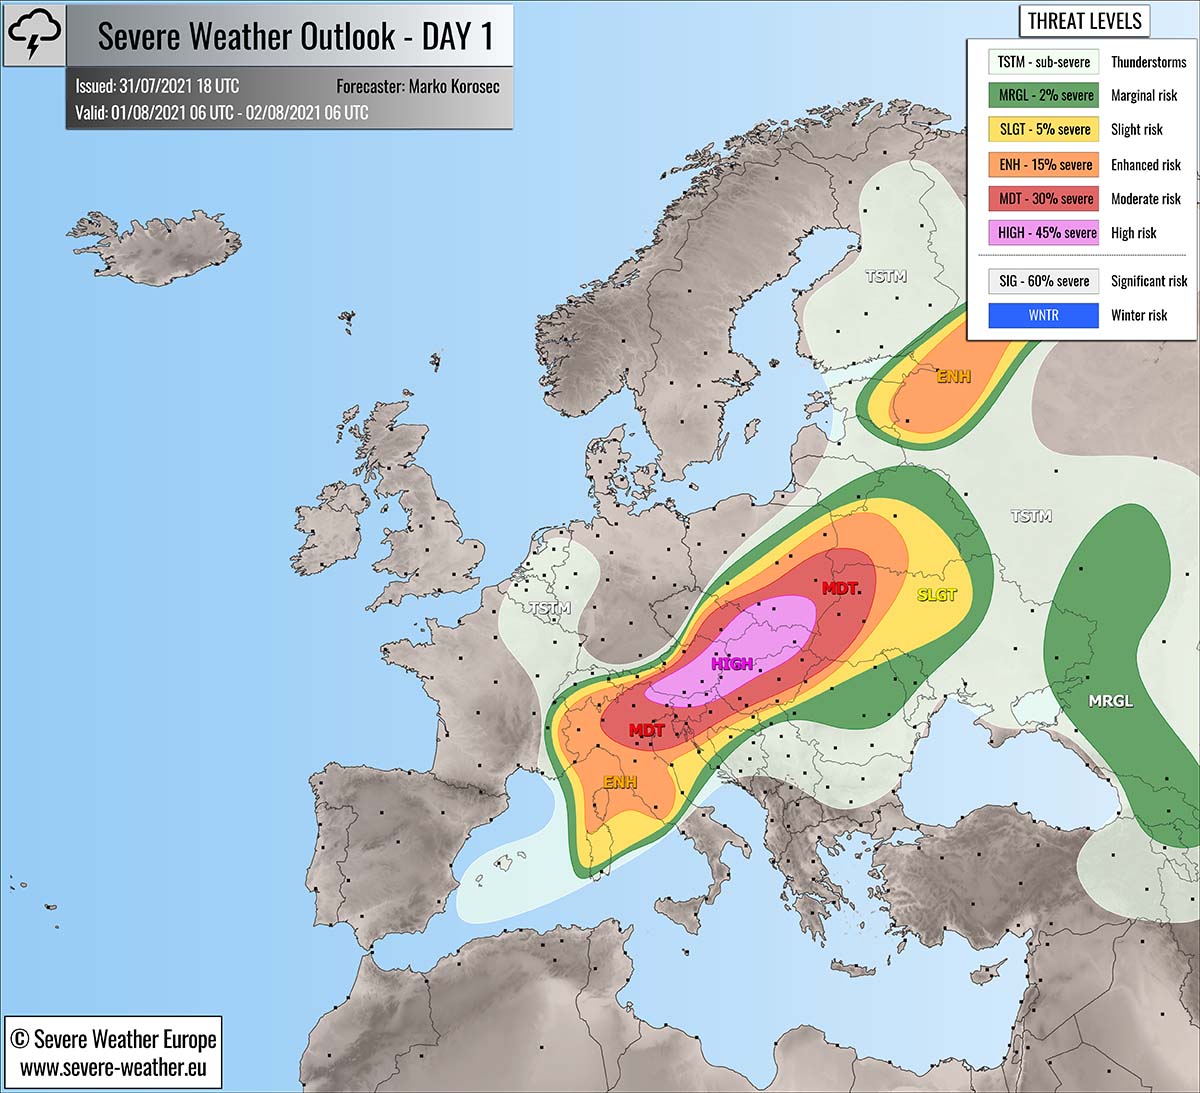 Severe Weather Forecast / Outlook for Europe   August 20st, 20220